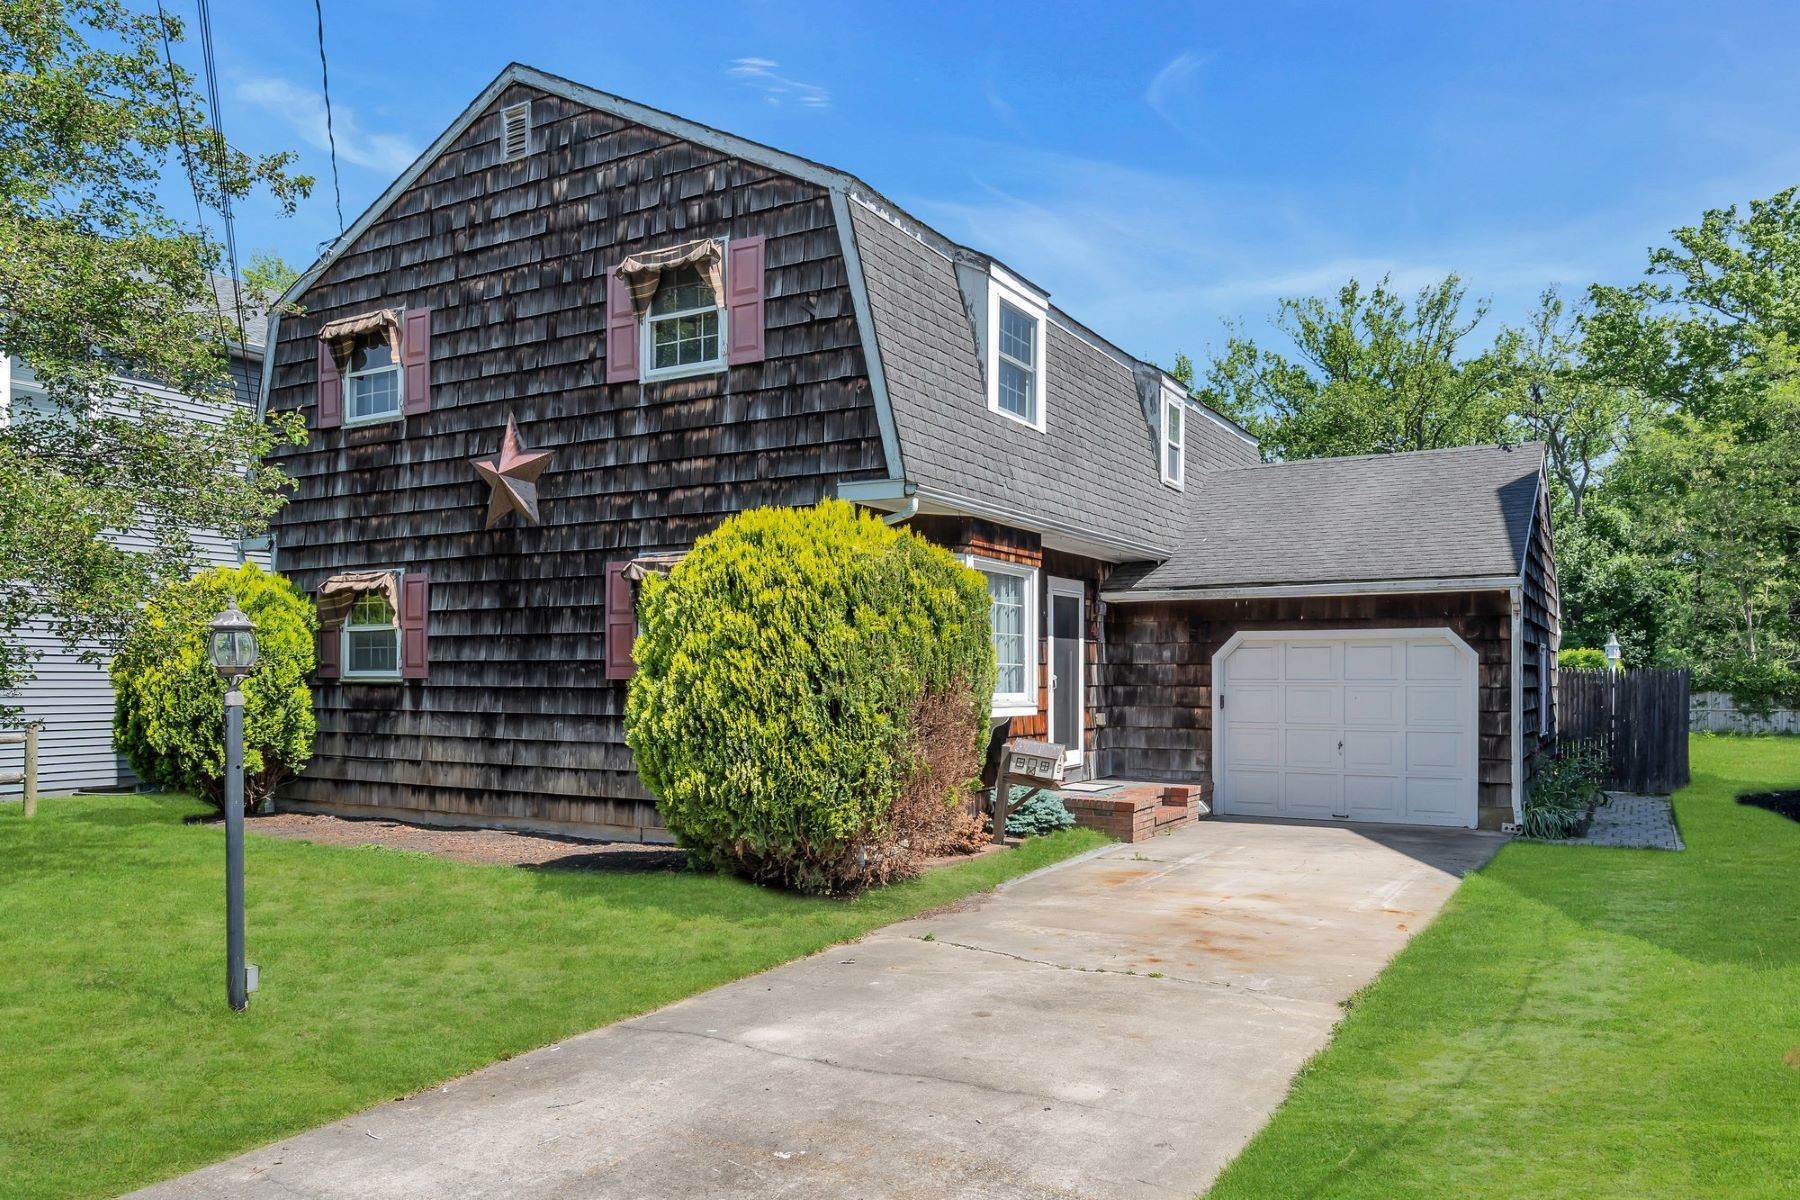 Single Family Homes for Sale at Location, Location 44 Ridge Avenue Manasquan, New Jersey 08736 United States